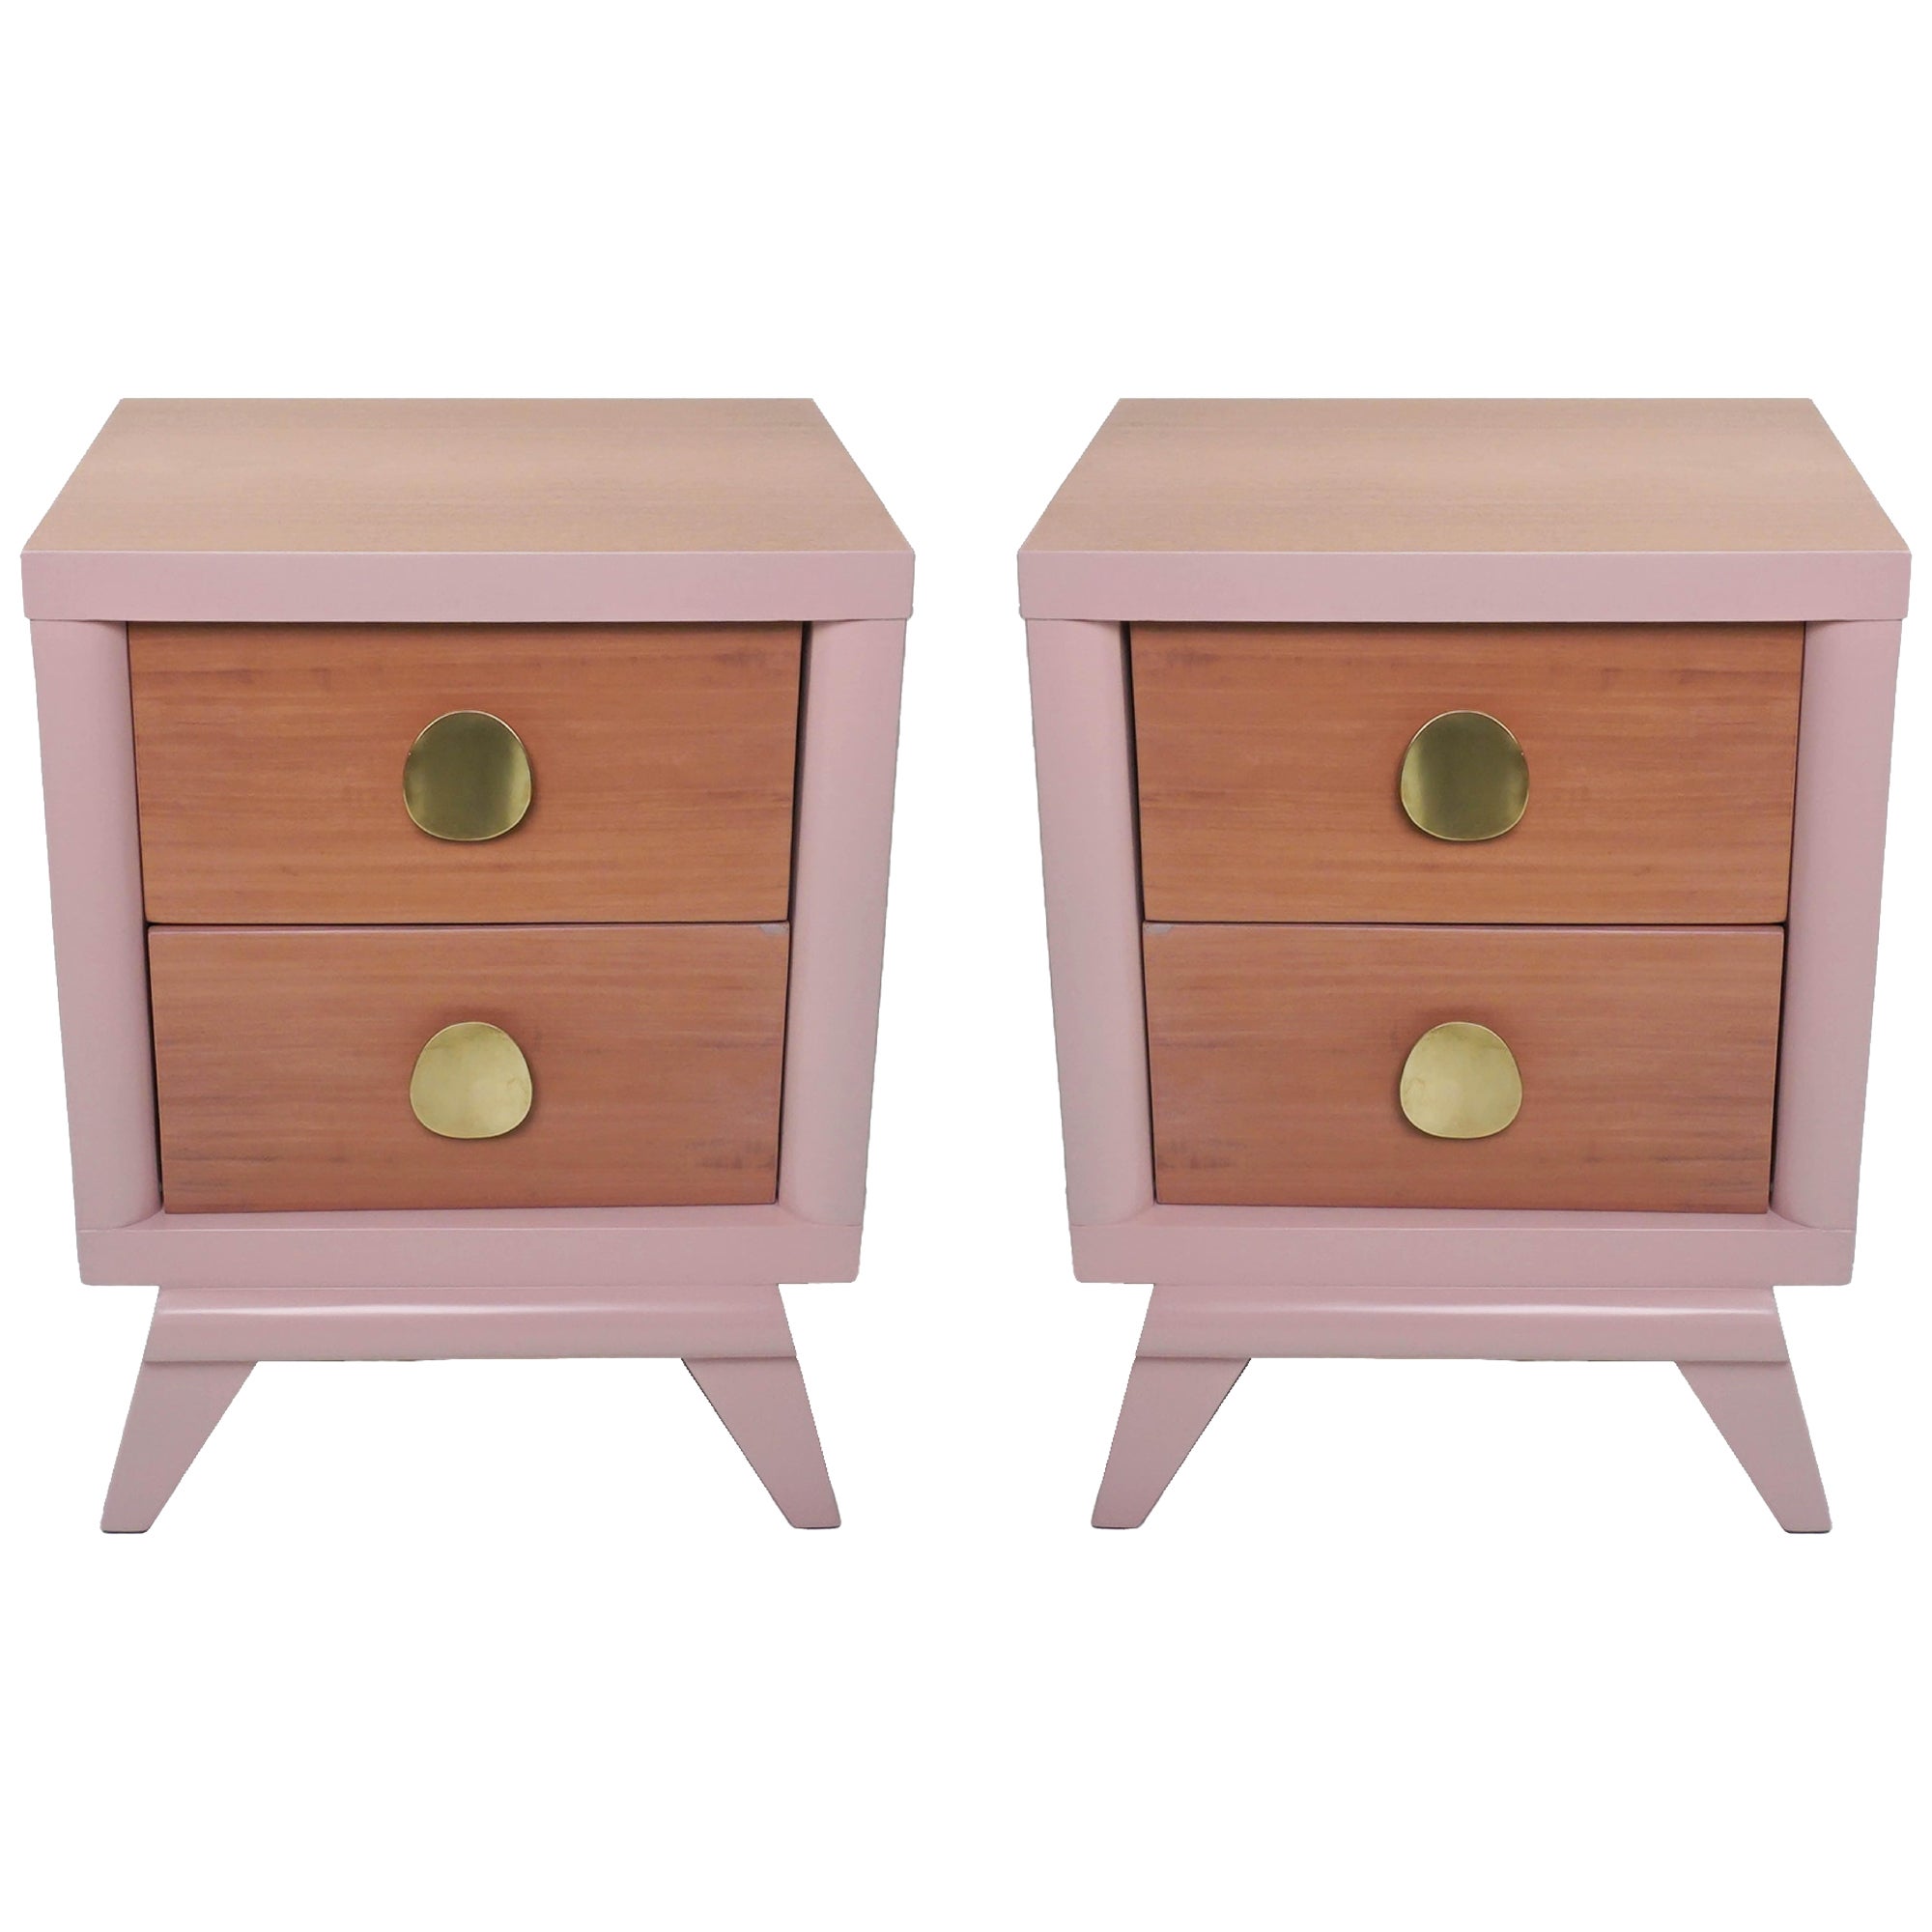 Pair of Mid-Century Mahogany End Tables in Dusty Pink